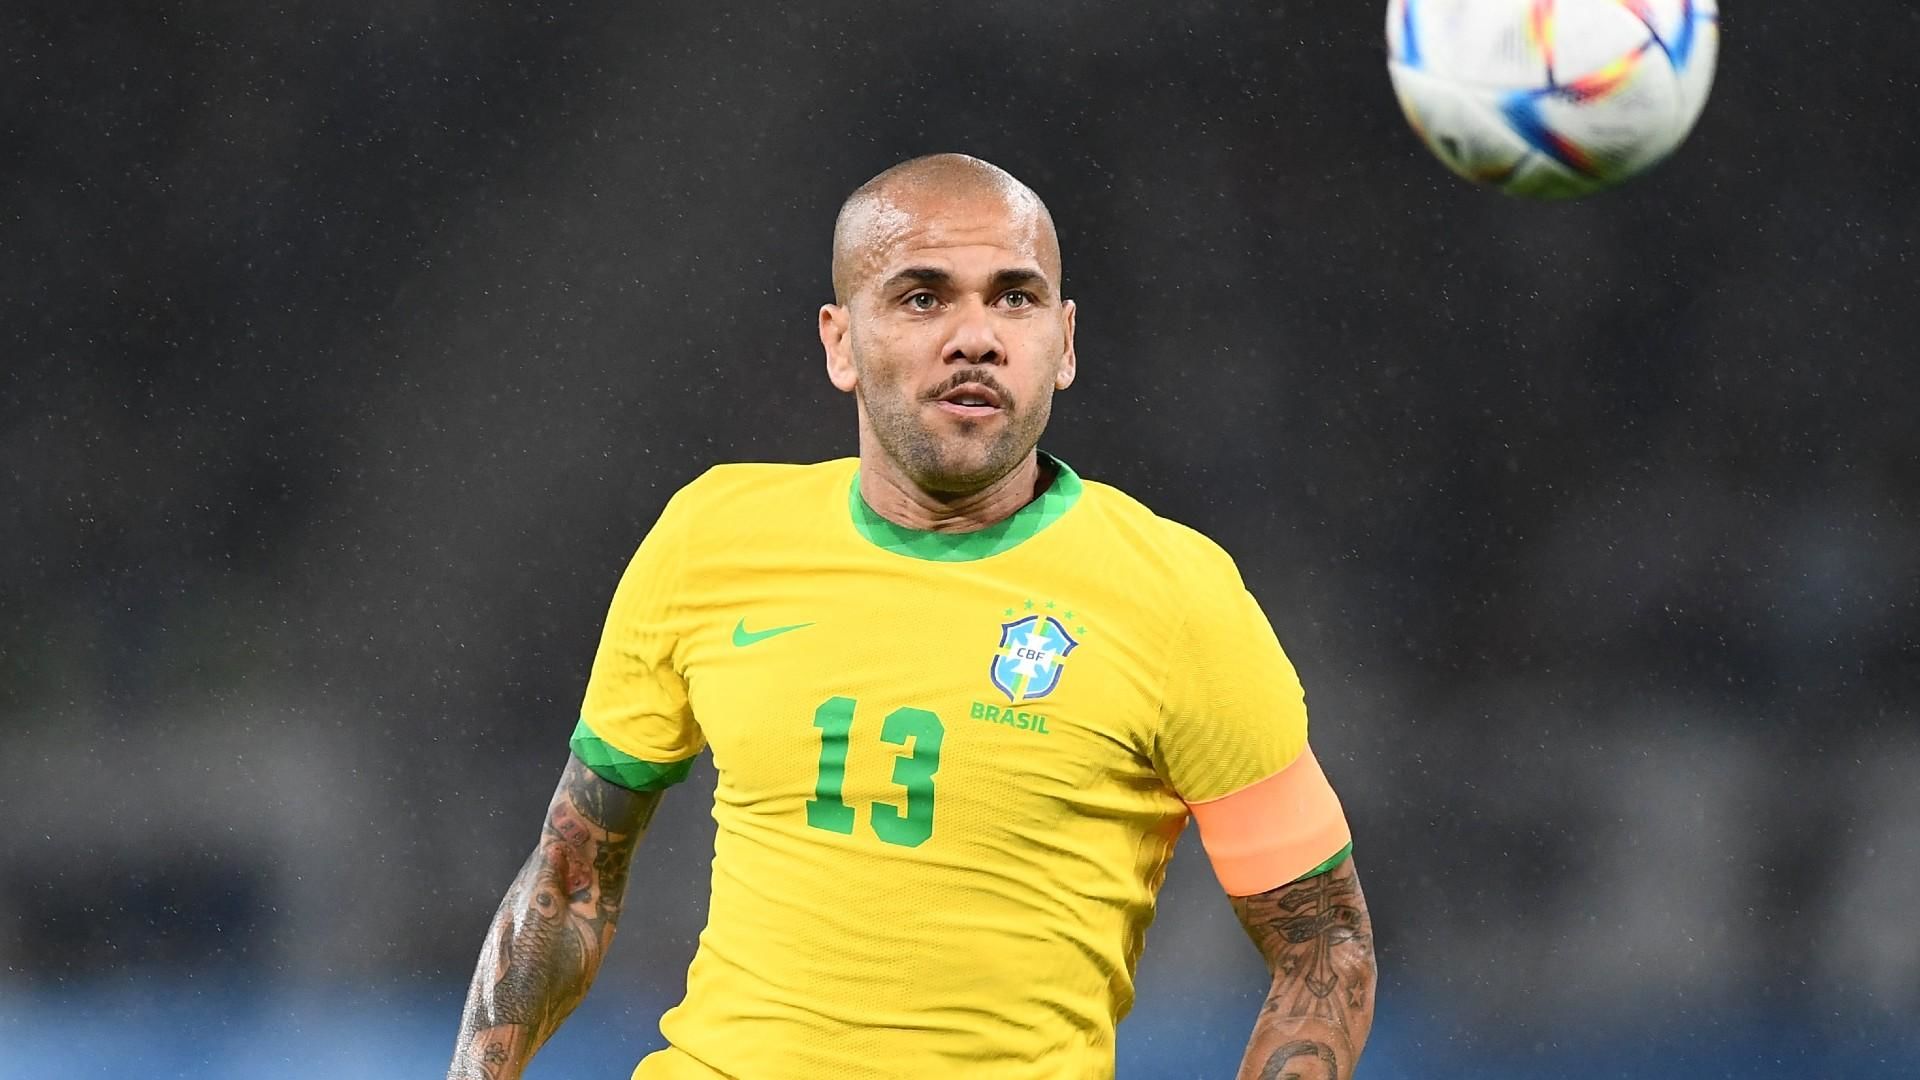 Dani Alves calls imprisonment one of the most difficult and confusing situations of his life